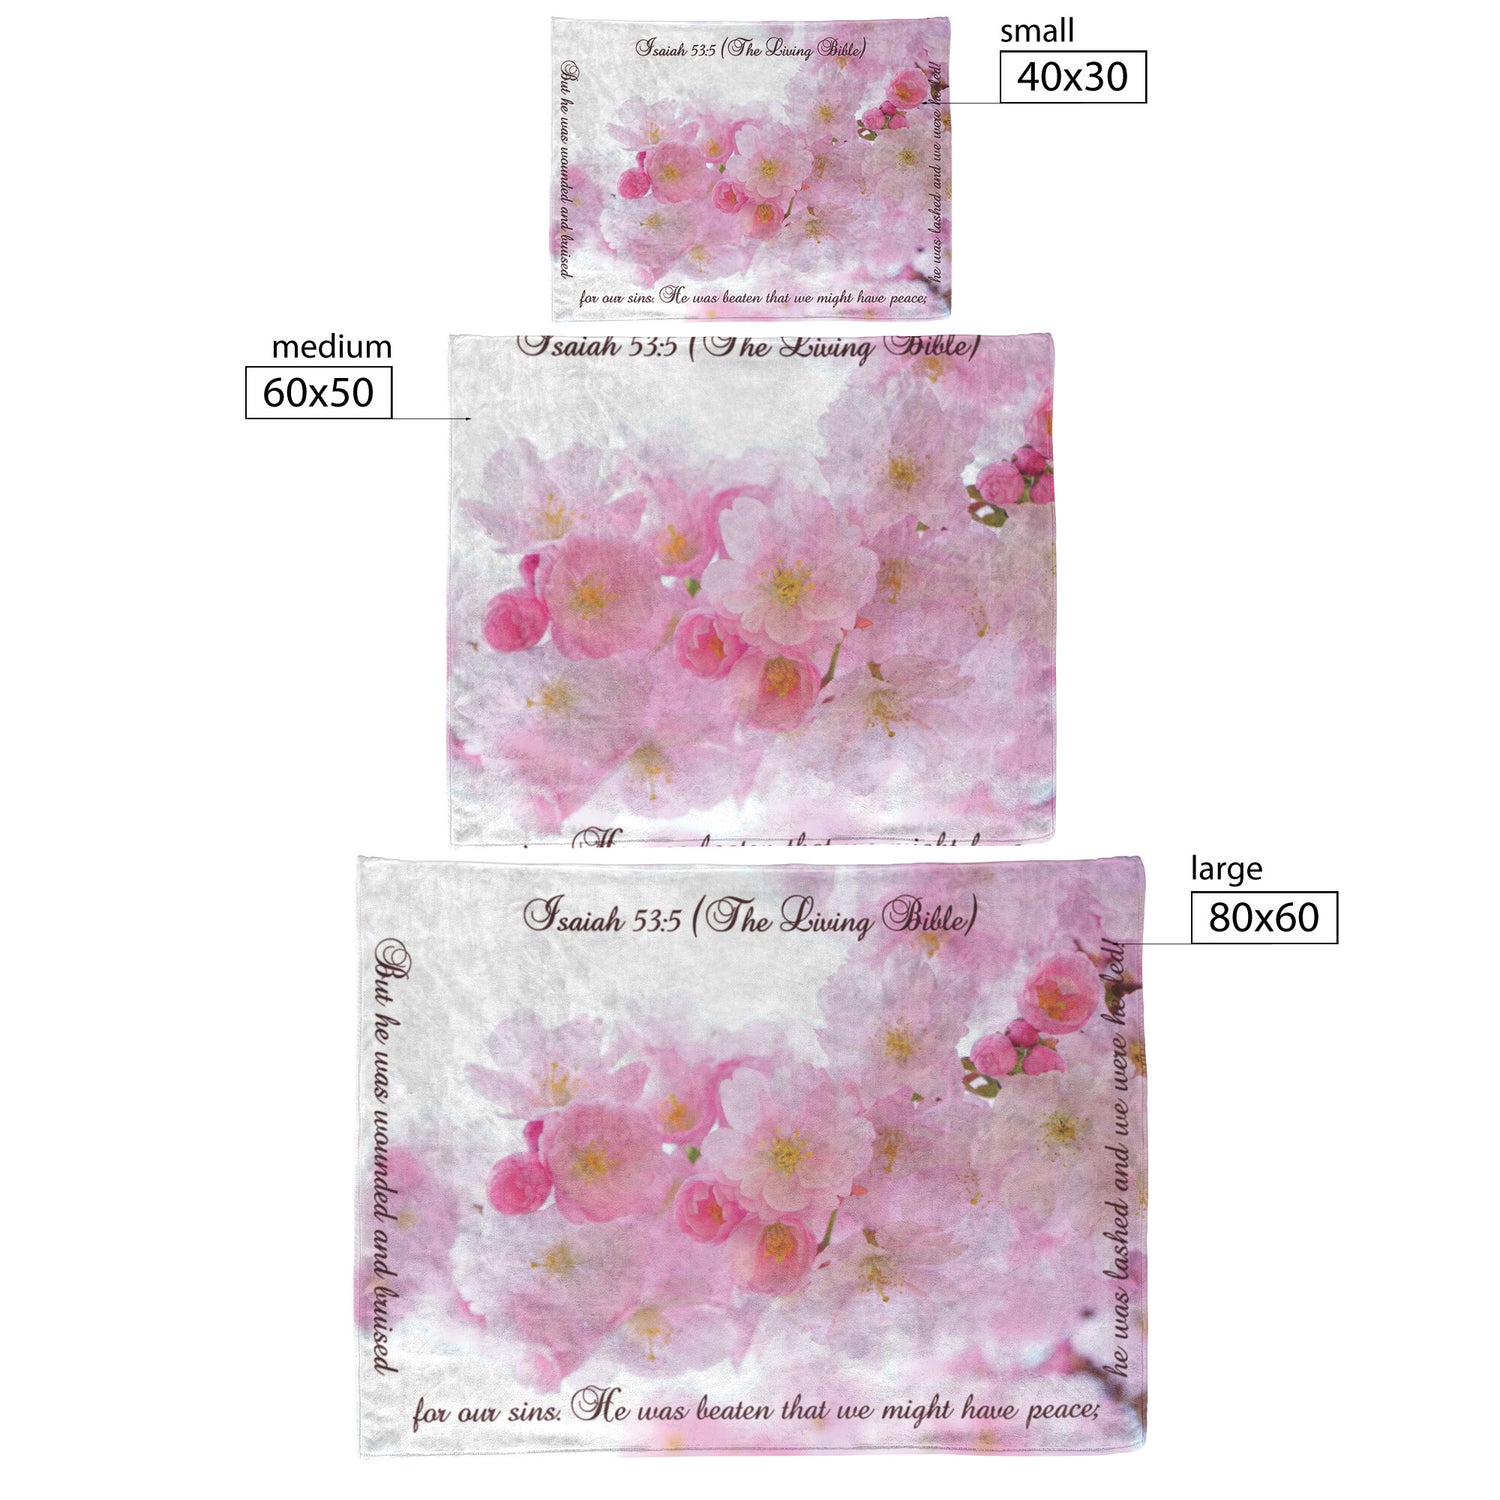 Healing Scripture with Spring Blossoms Fleece Blanket - Signs and Seasons Gifts